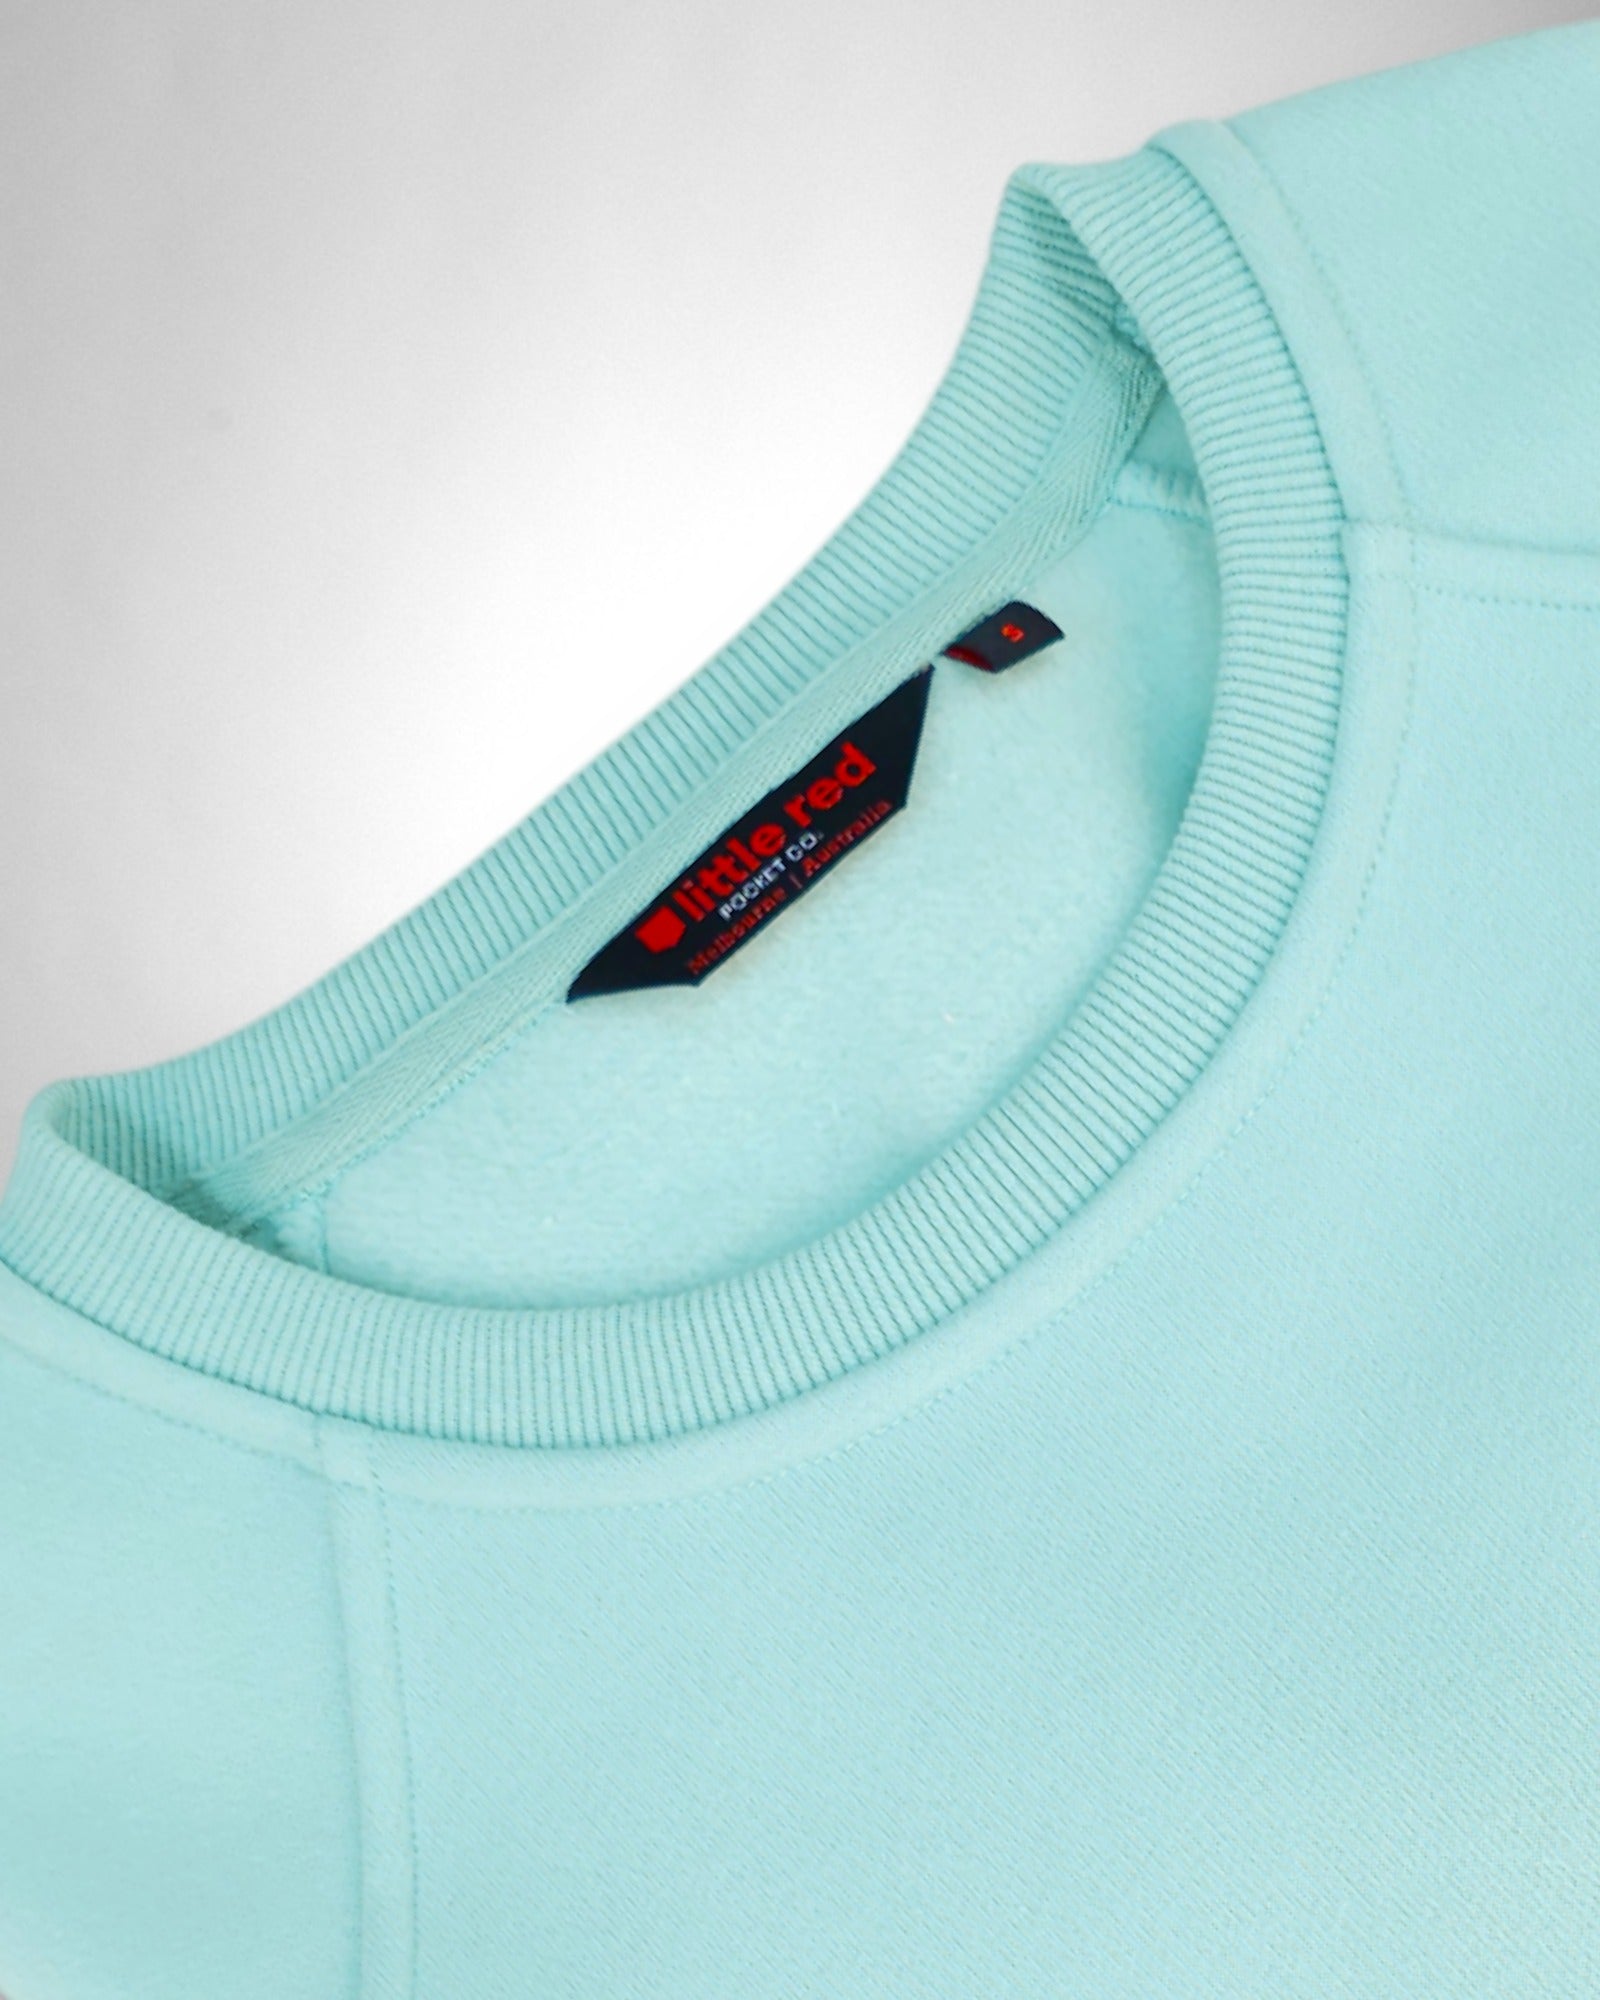 "Catch Some Clean Air" Female Crewneck Sweater - Turquoise